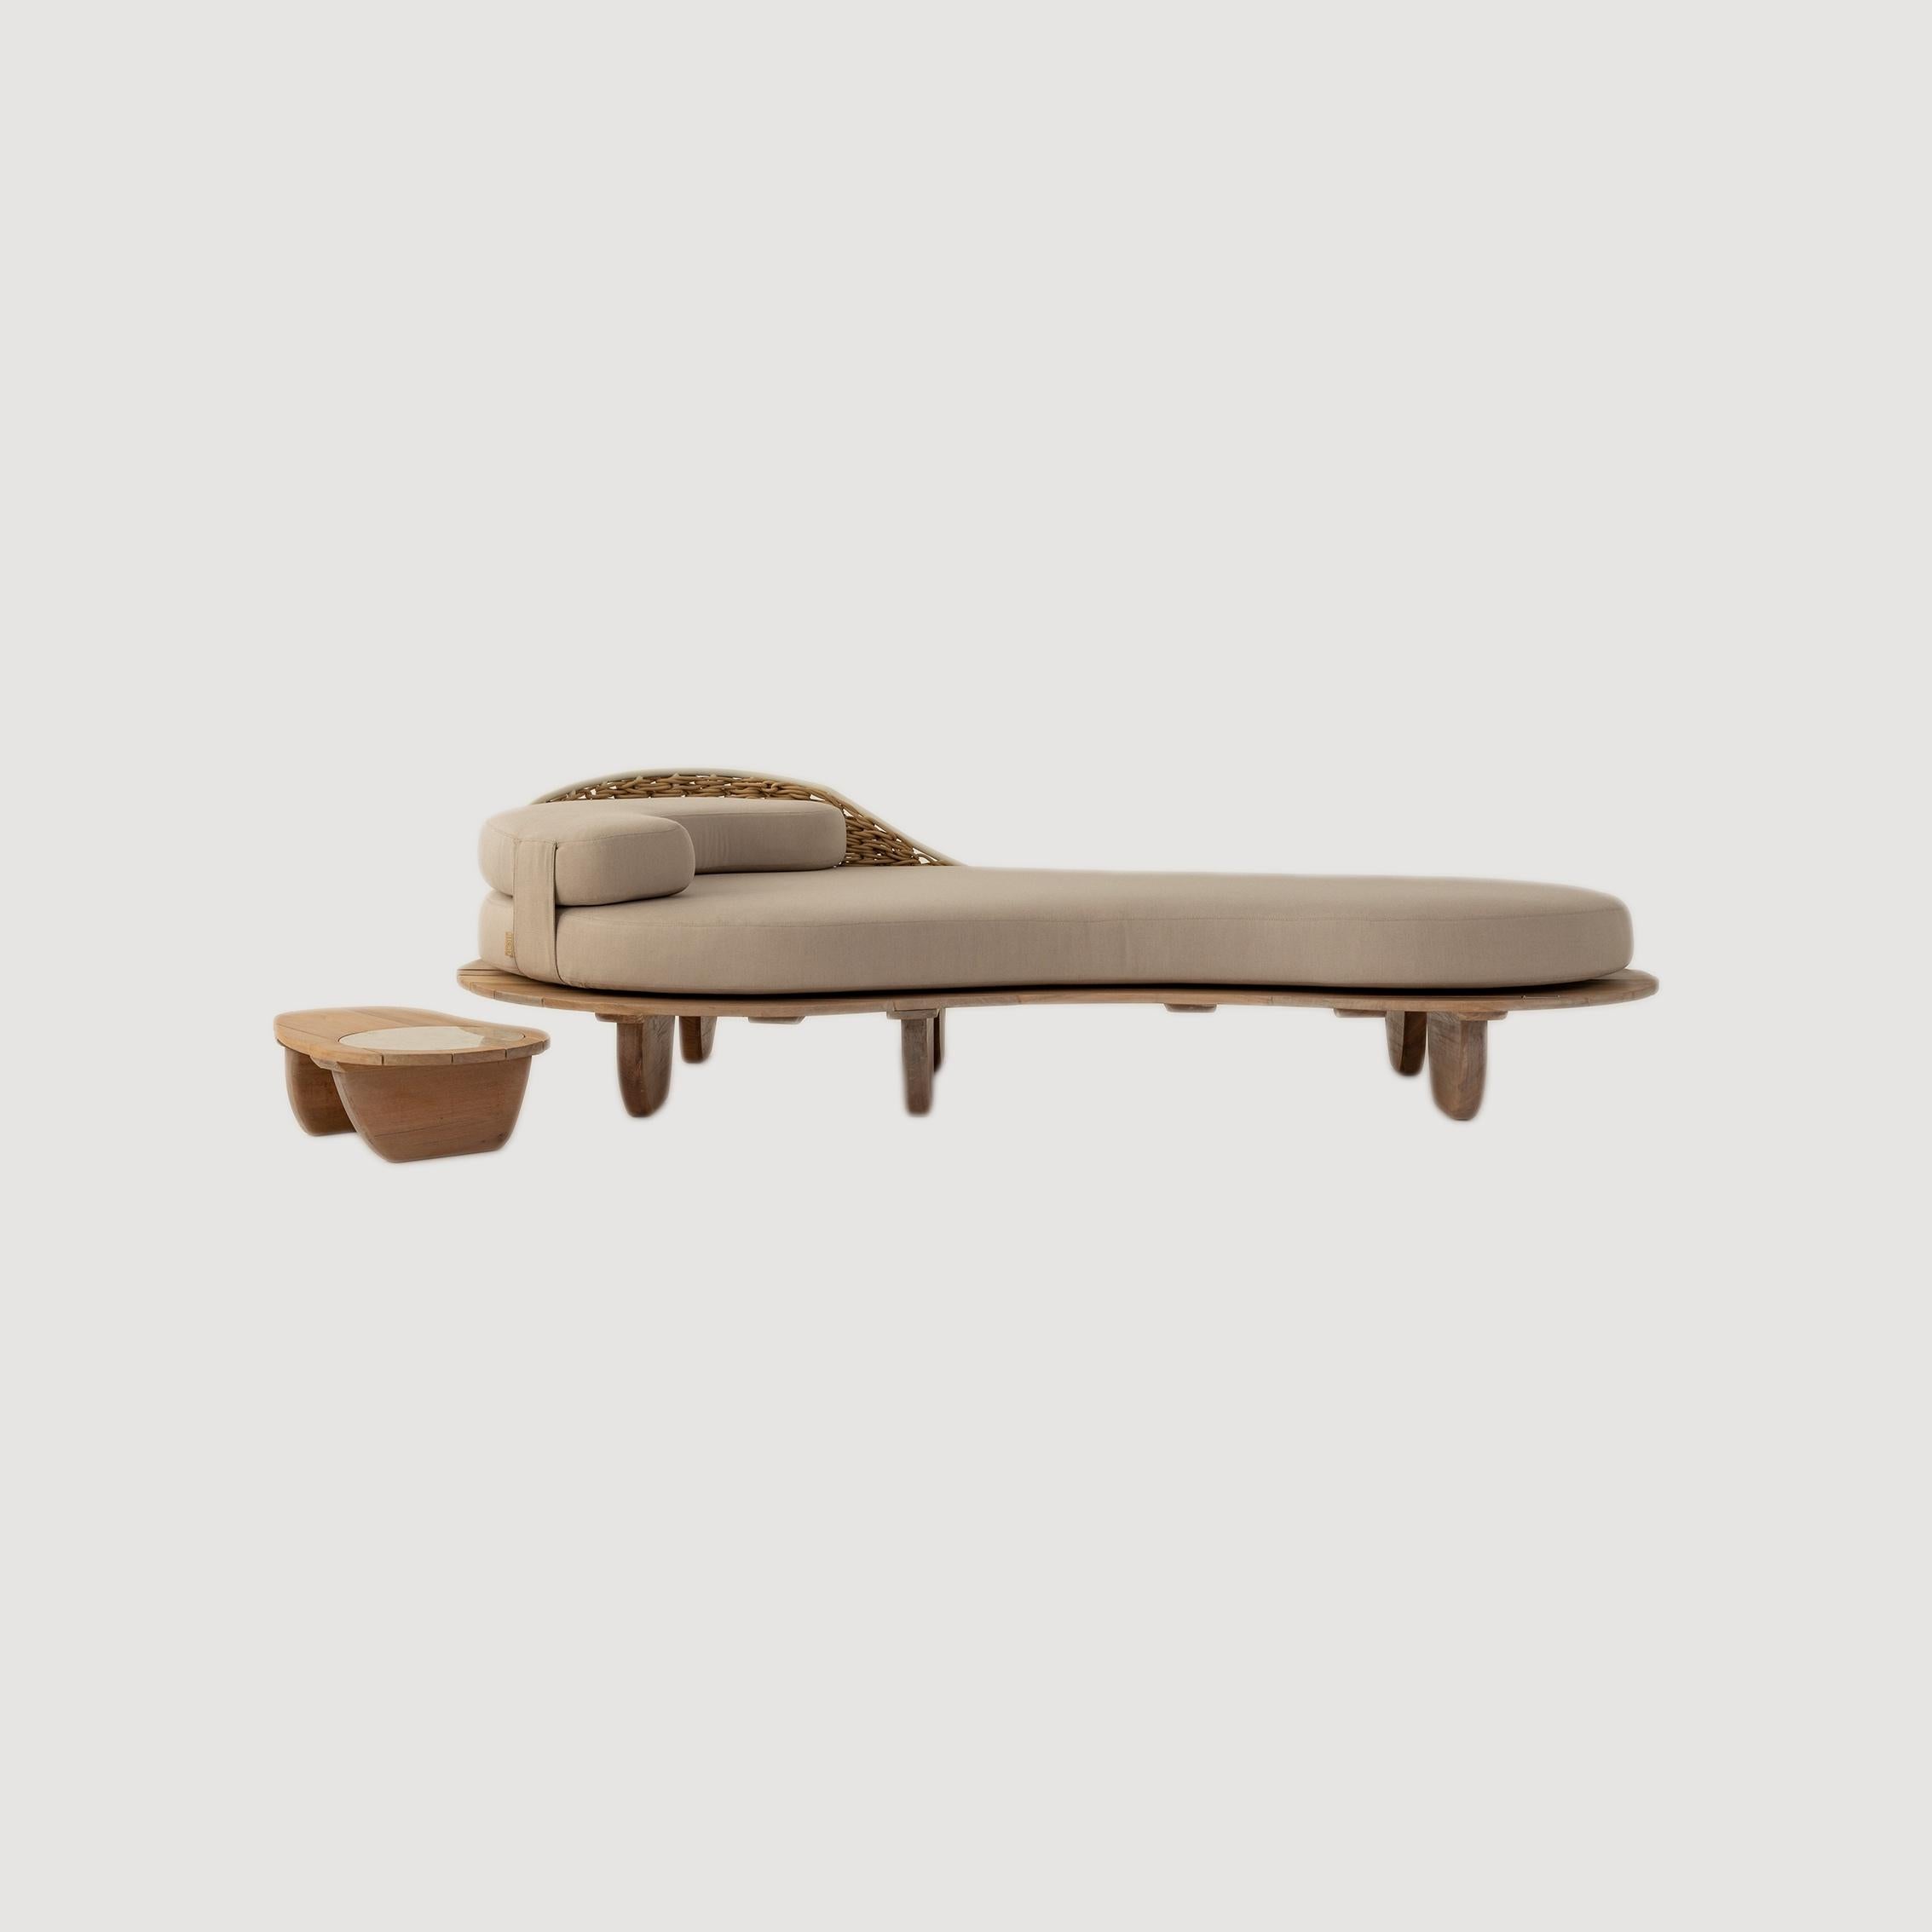 The Sayari Indoor / Outdoor Daybed Chaise Collection by Studio Lloyd For Sale 1